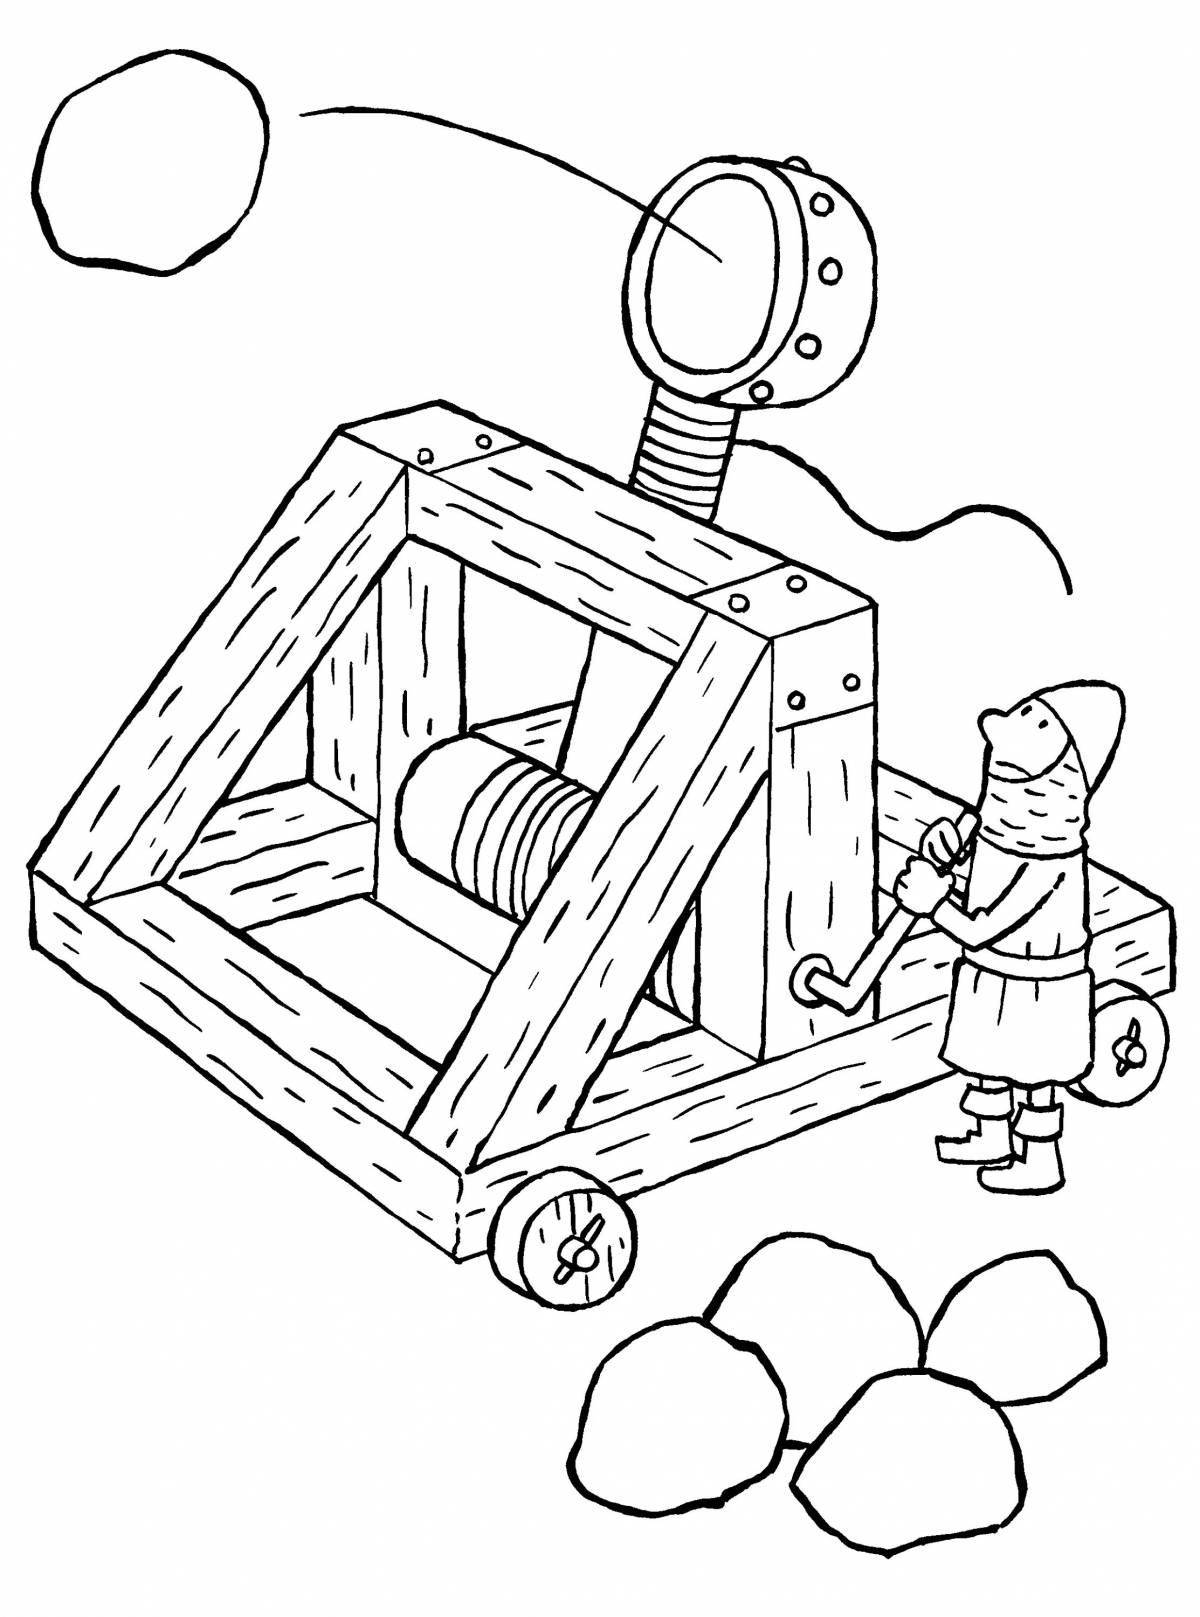 Interesting catapult coloring page